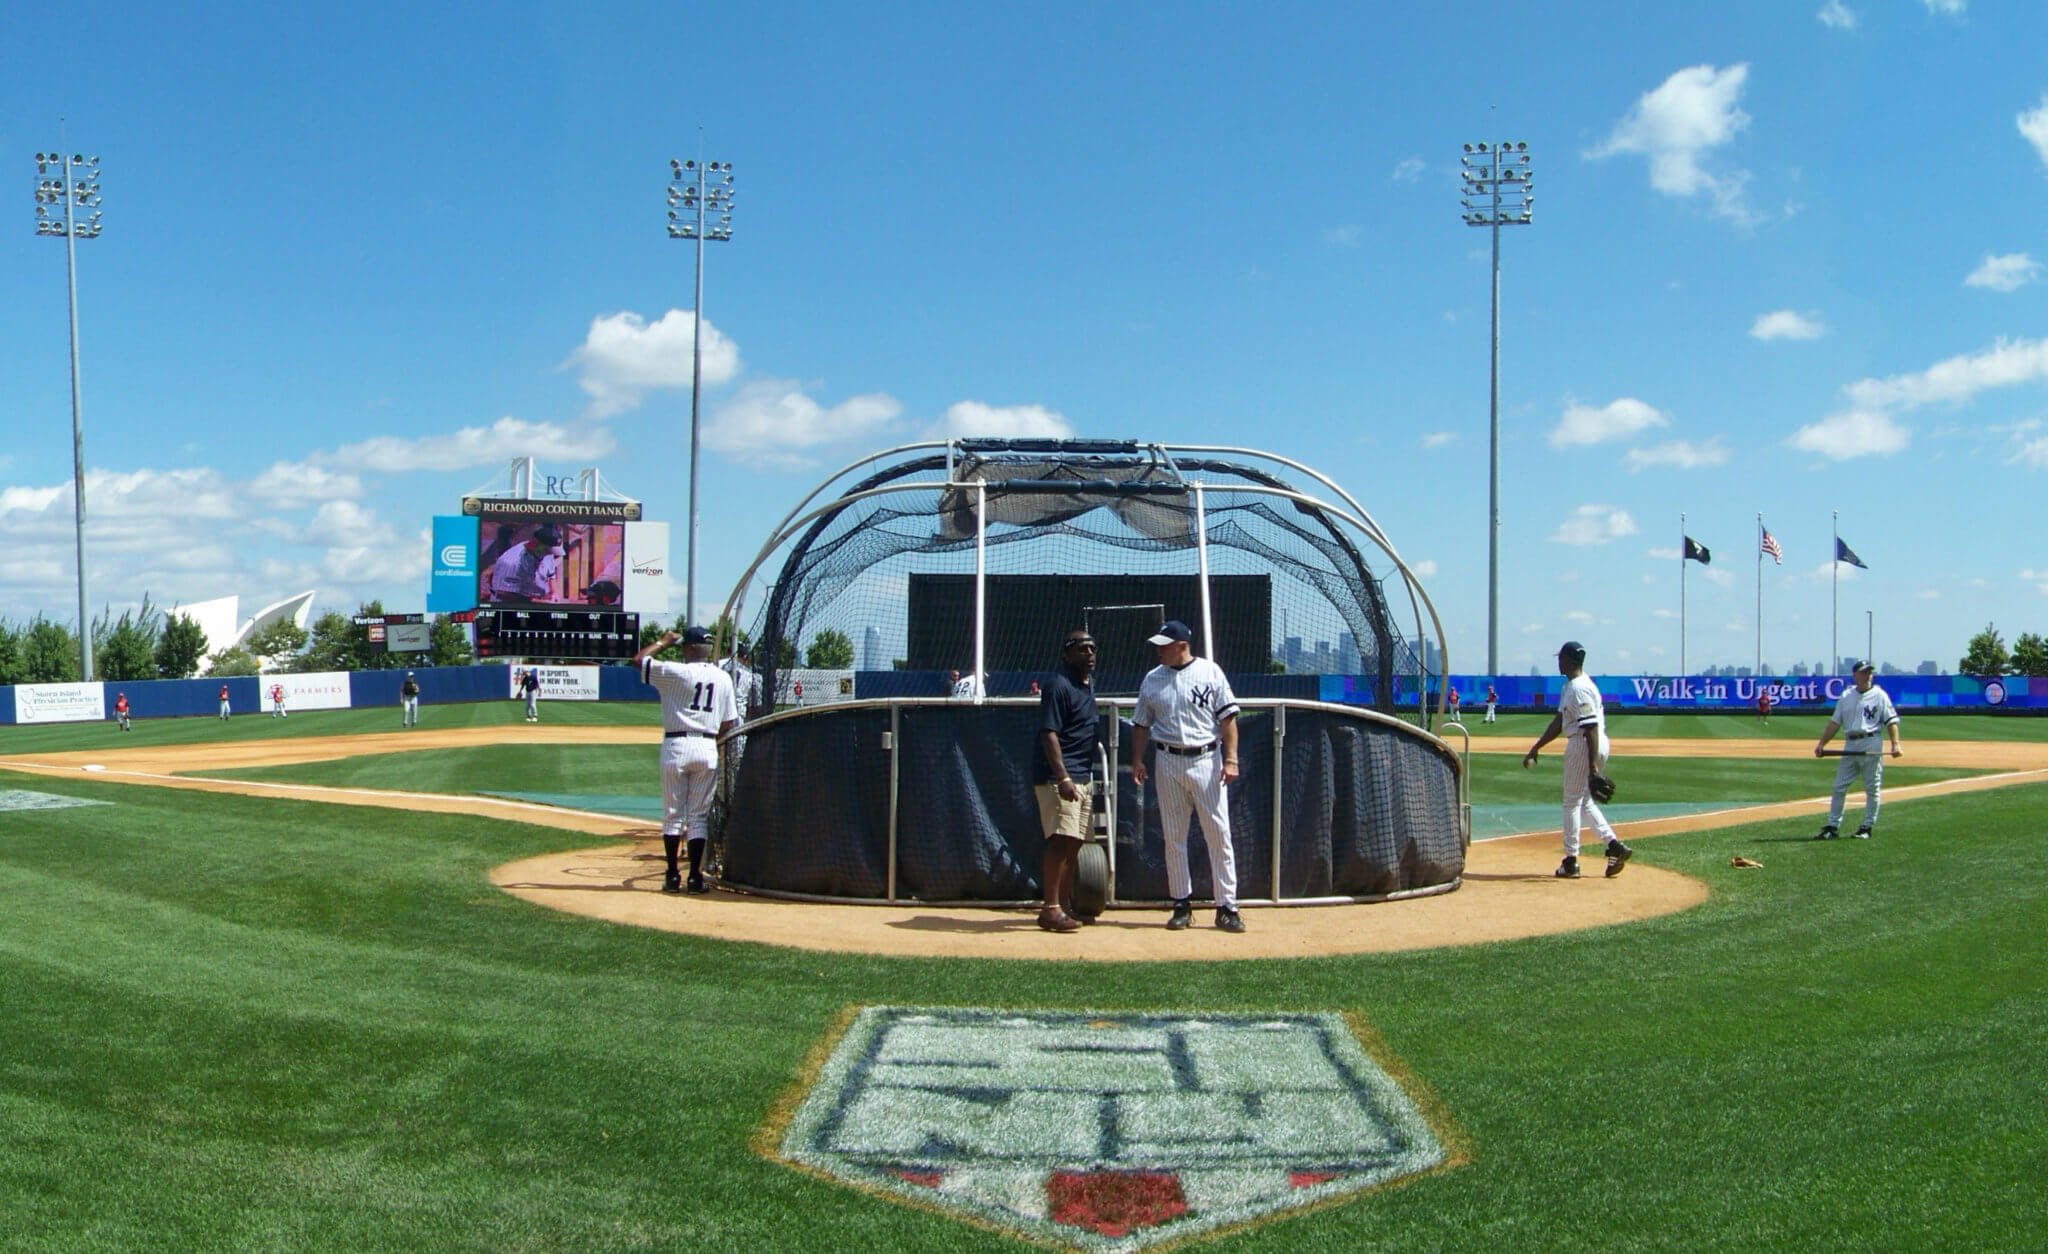 Somerset Patriots are Yankees' new Double-A farm club, so they'll